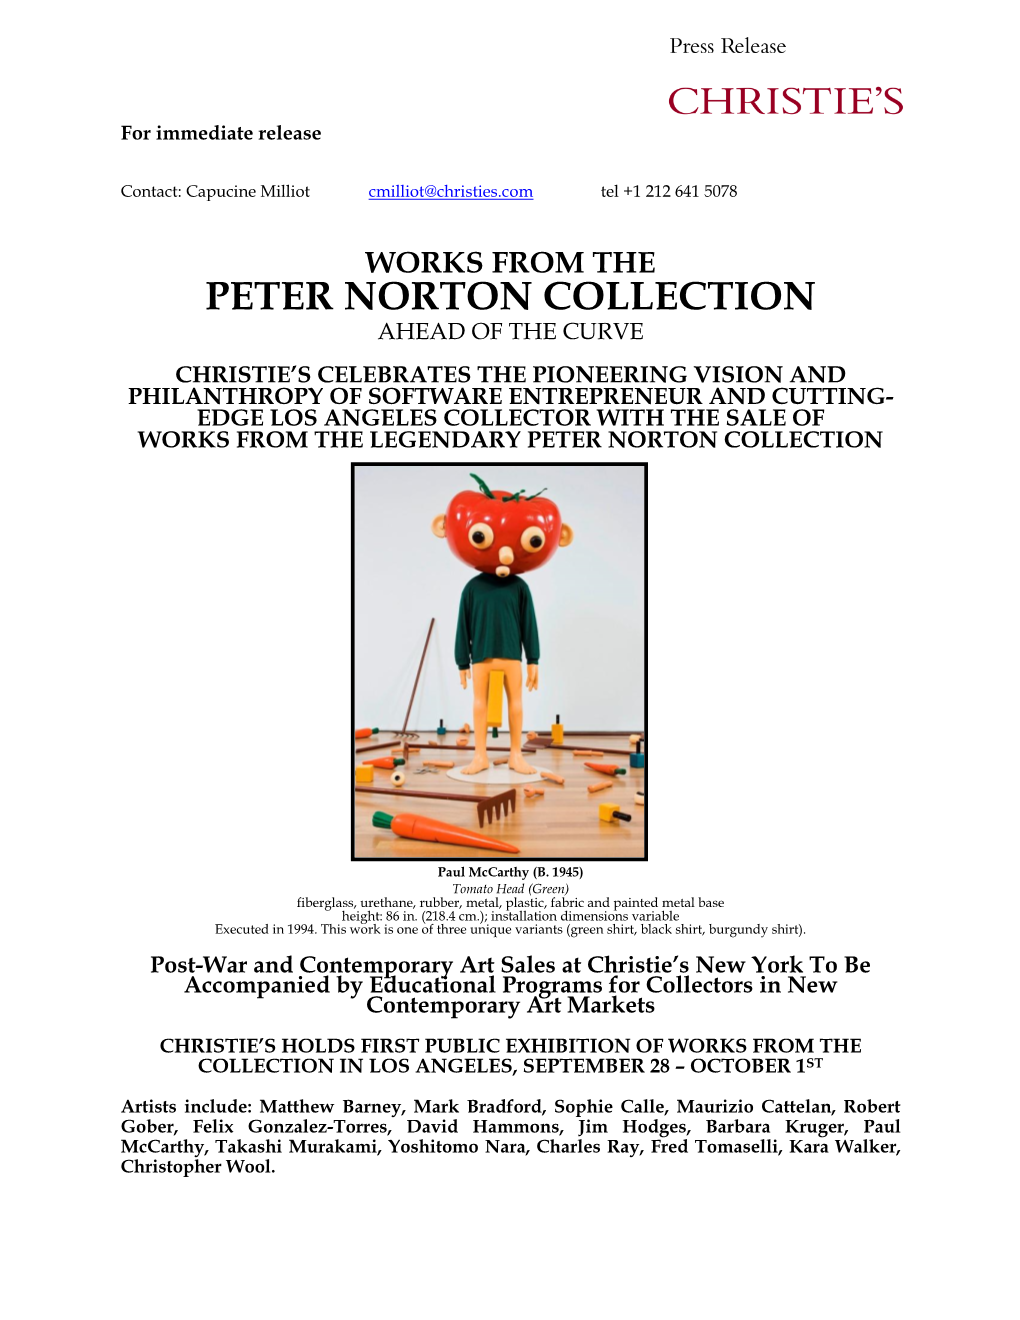 Peter Norton Collection Ahead of the Curve